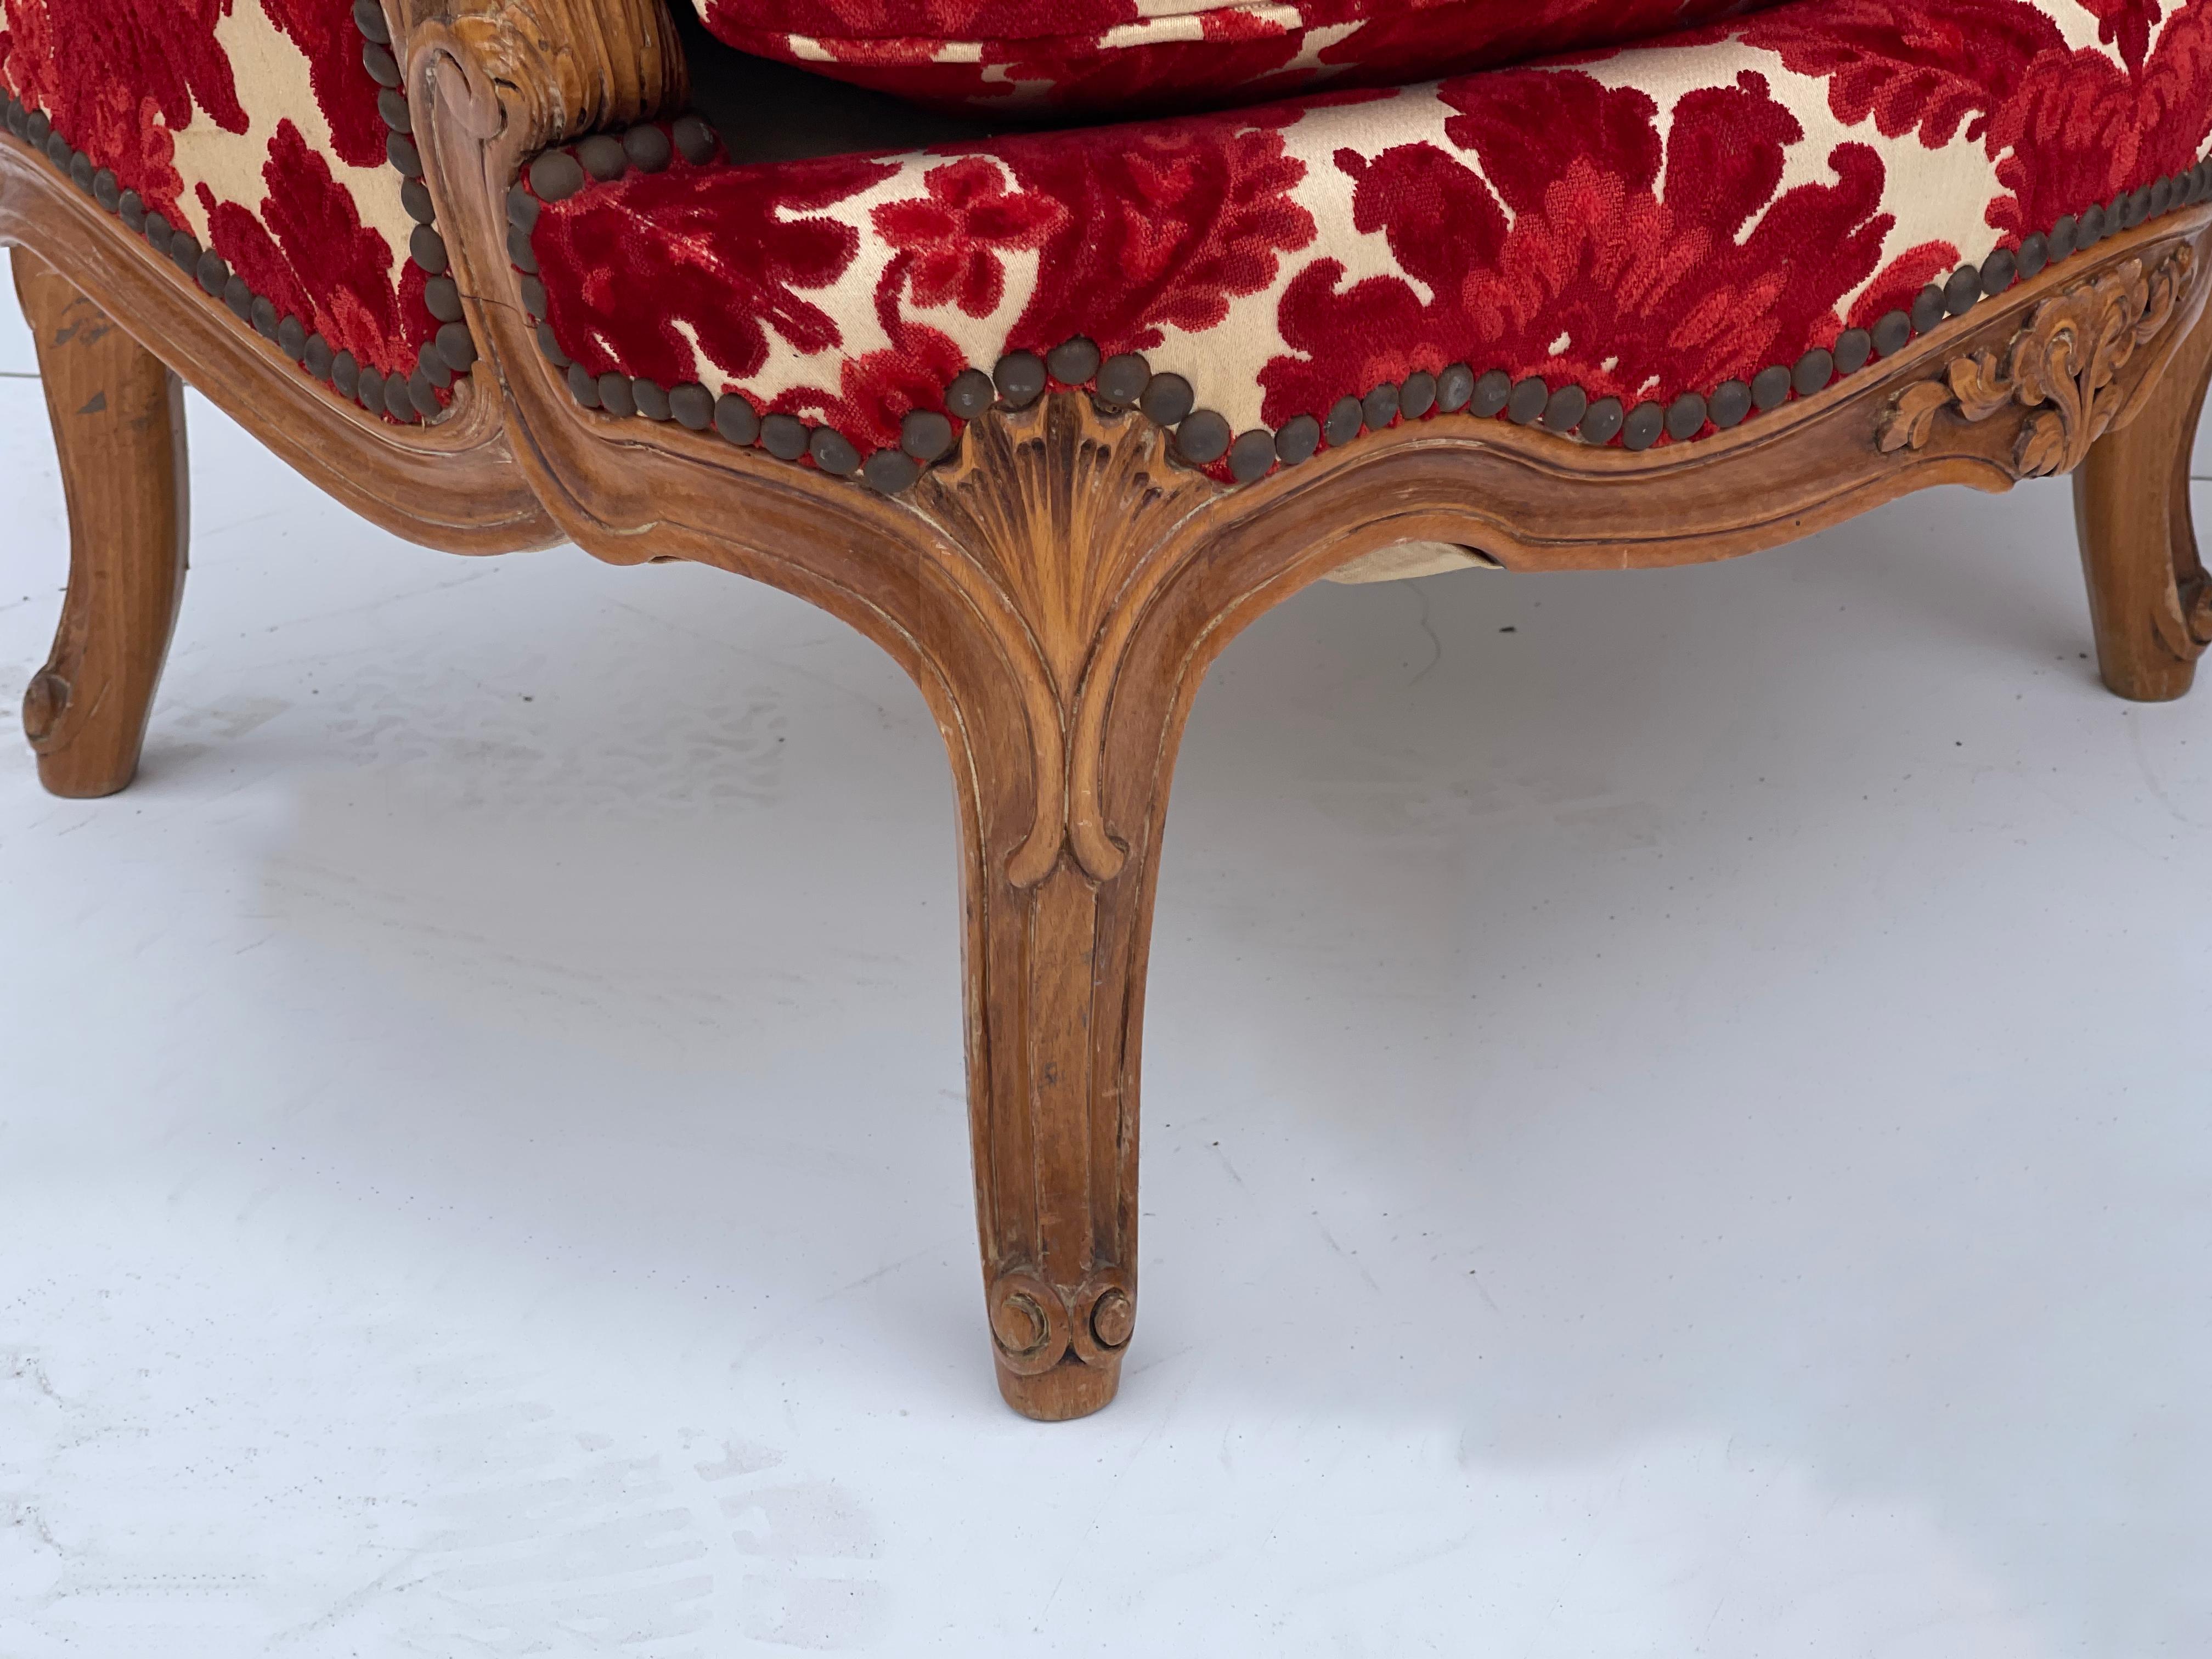 1930s French Carved Fruitwood Chairs in Red Cut Velvet Damask, Pair 2